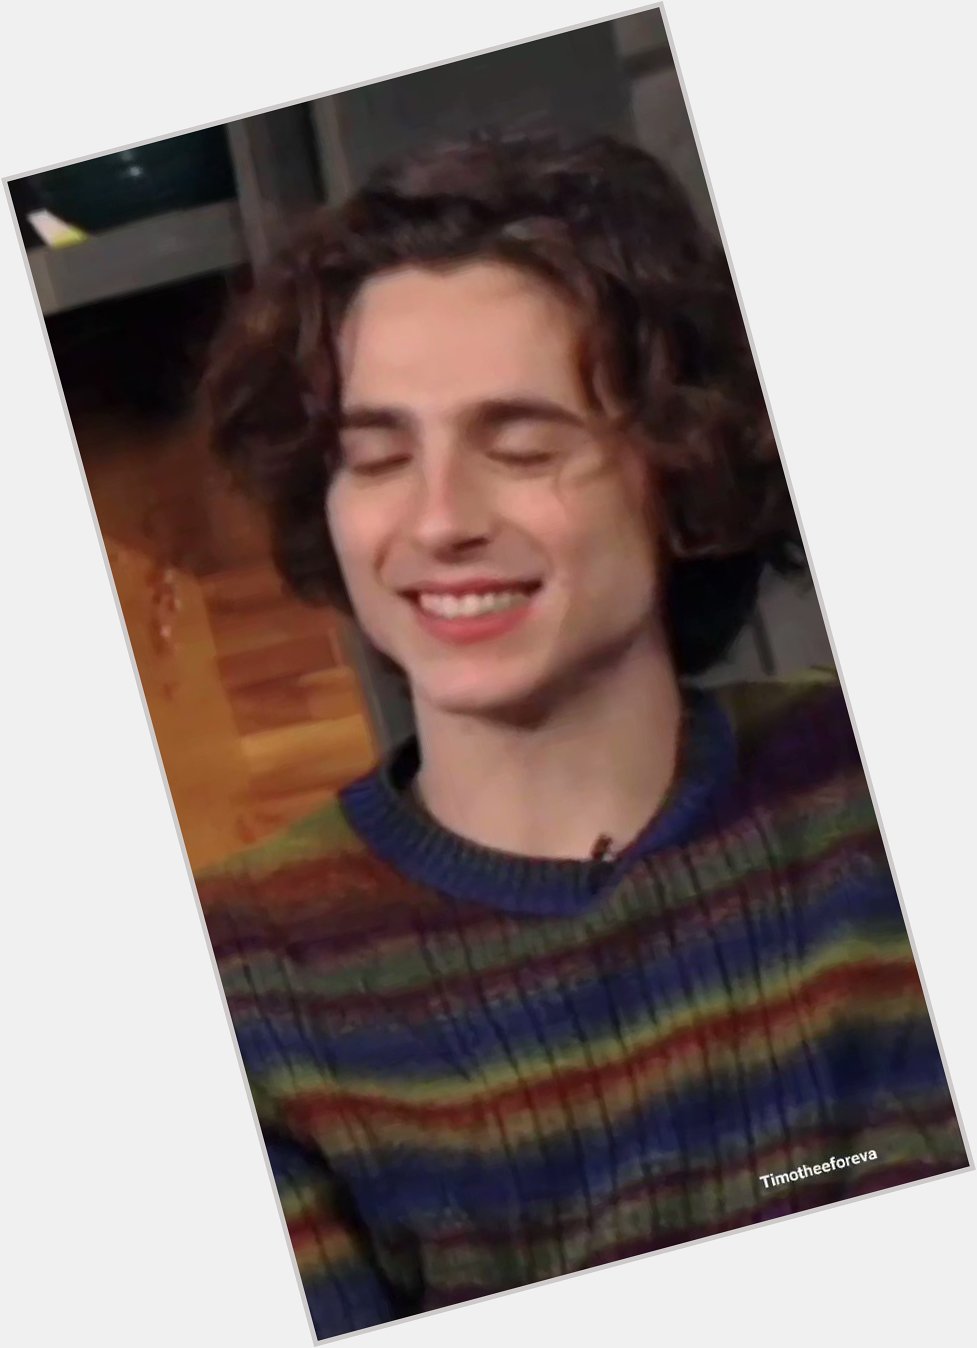 Happy 25th birthday to timothee Chalamet.     